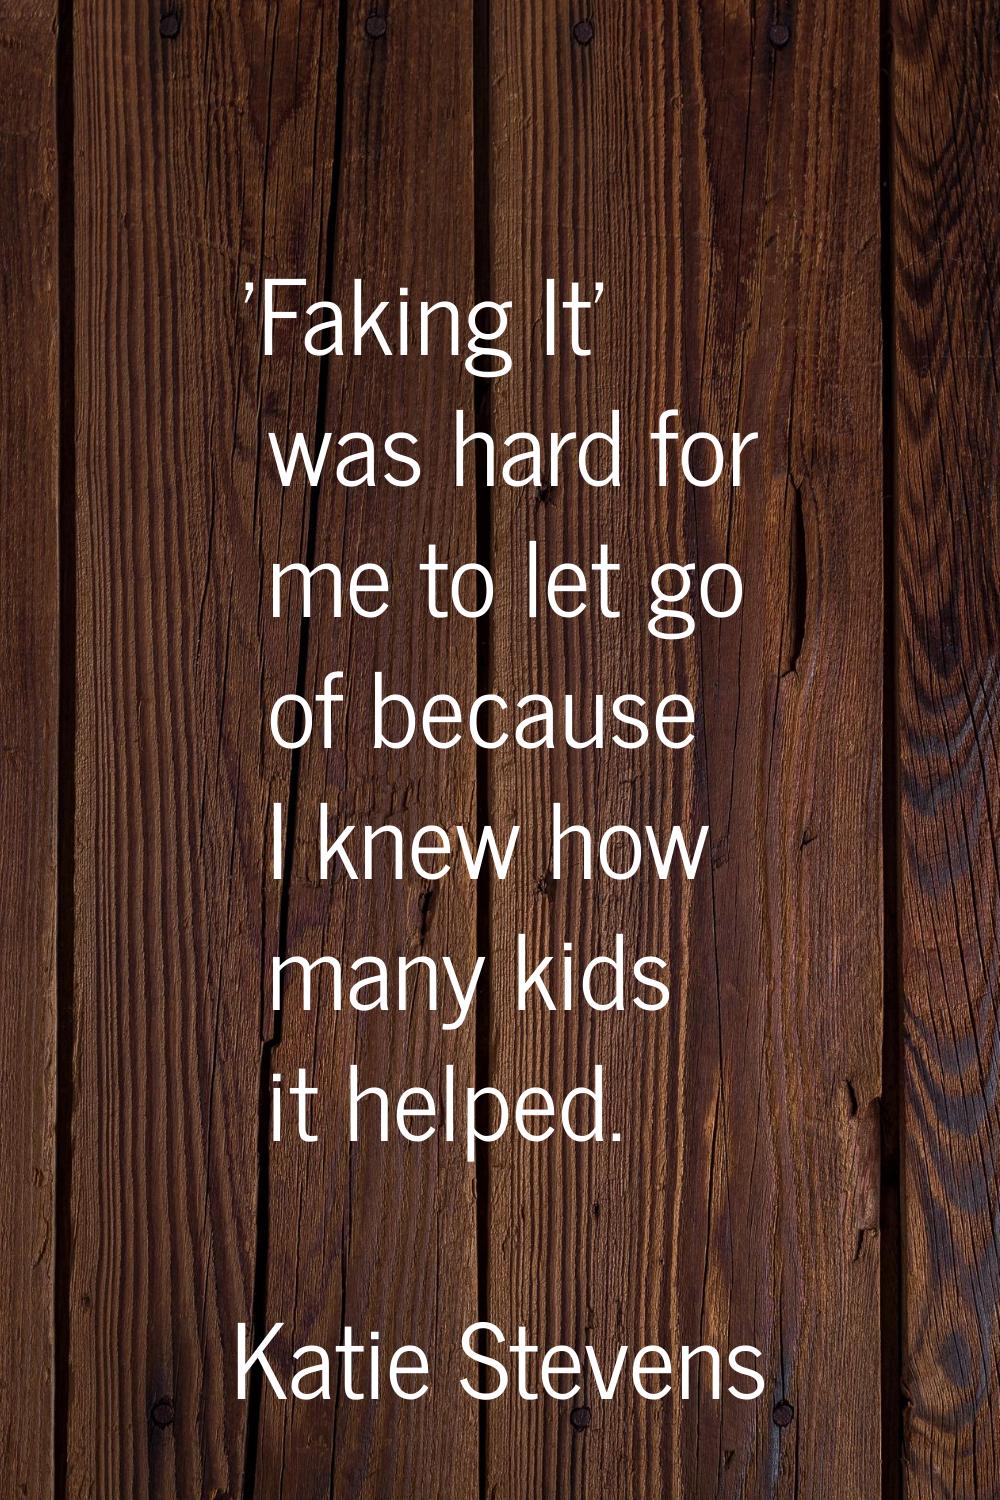 'Faking It' was hard for me to let go of because I knew how many kids it helped.